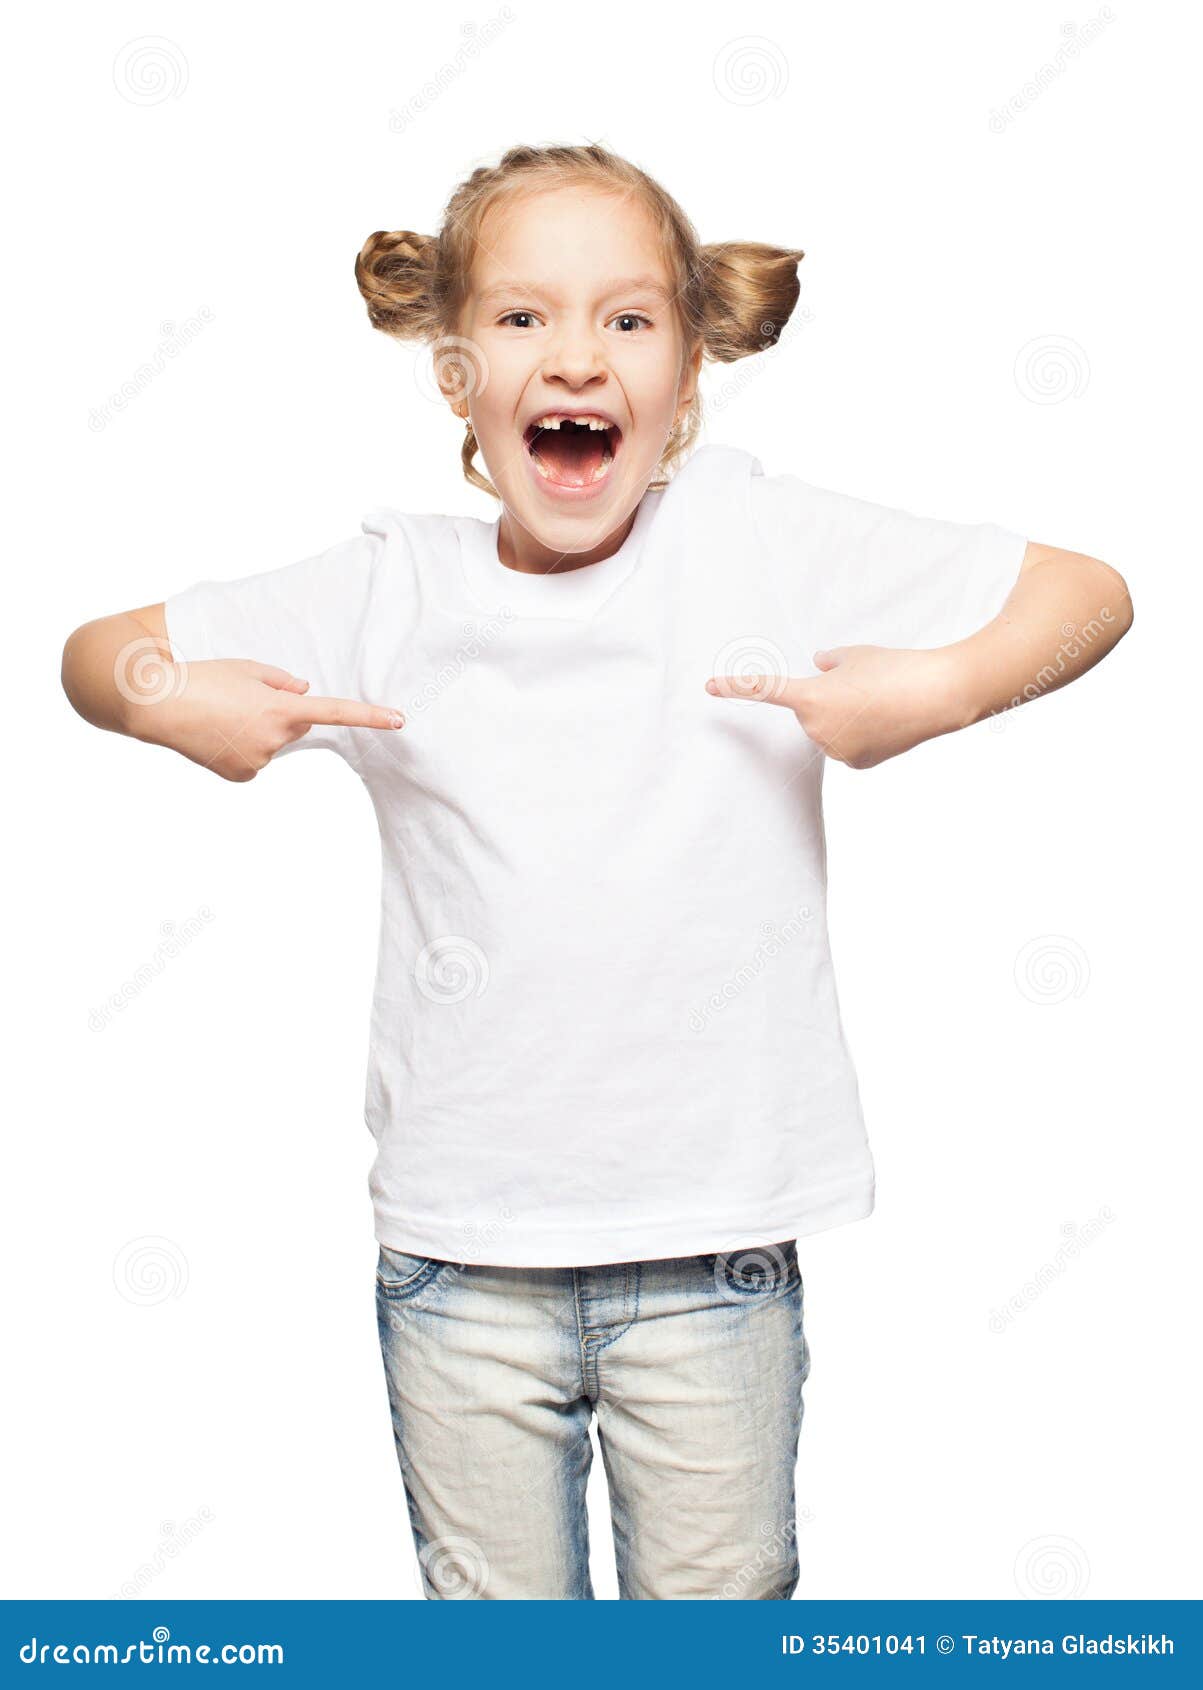 Child In White T-shirt Stock Image - Image: 35401041